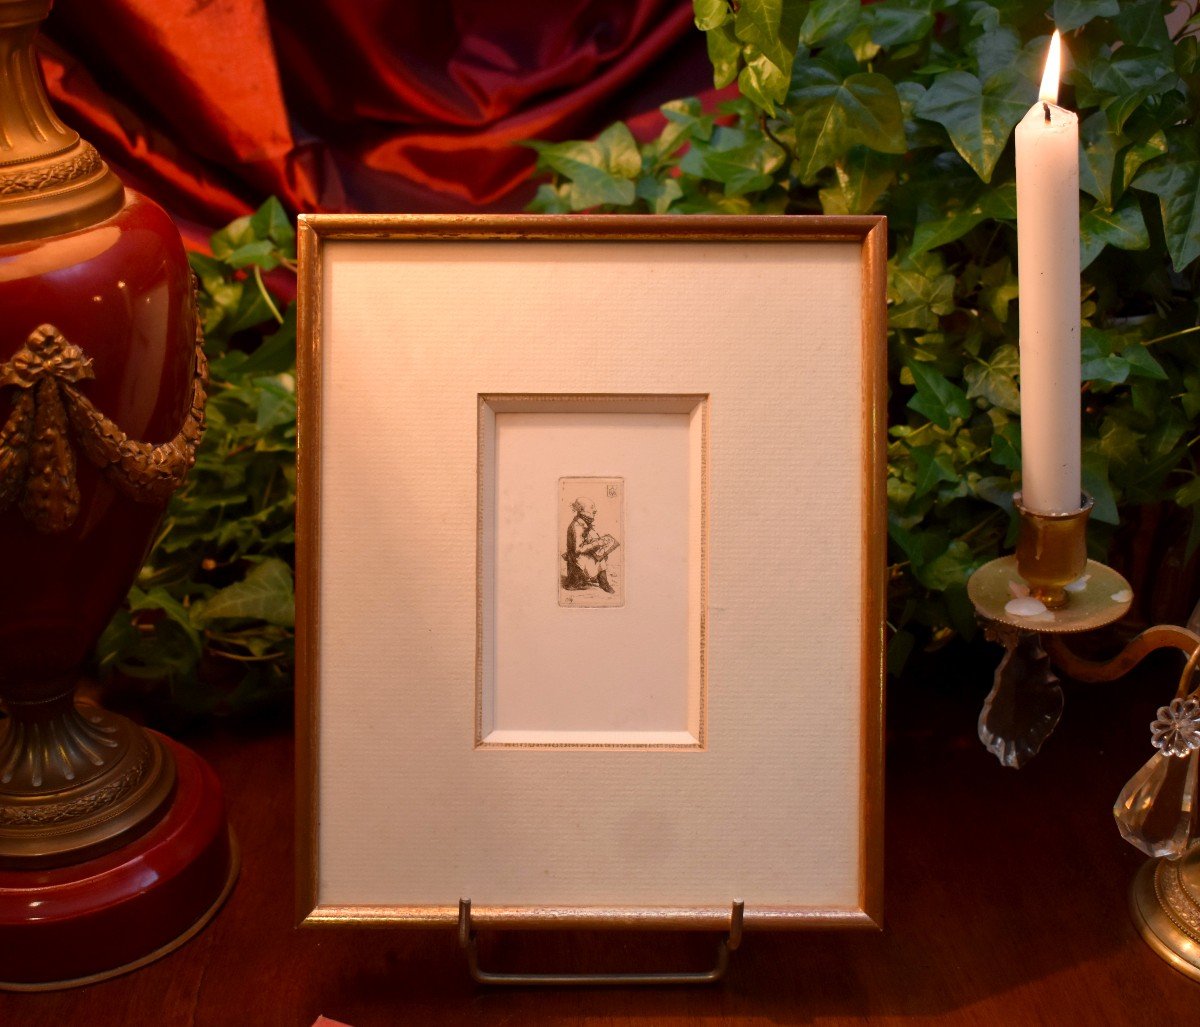 Ex-libris Framed And Signed, Artist Draftsman With Coat Of Arms, Coat Of Arms With Crowned Eagle,-photo-5